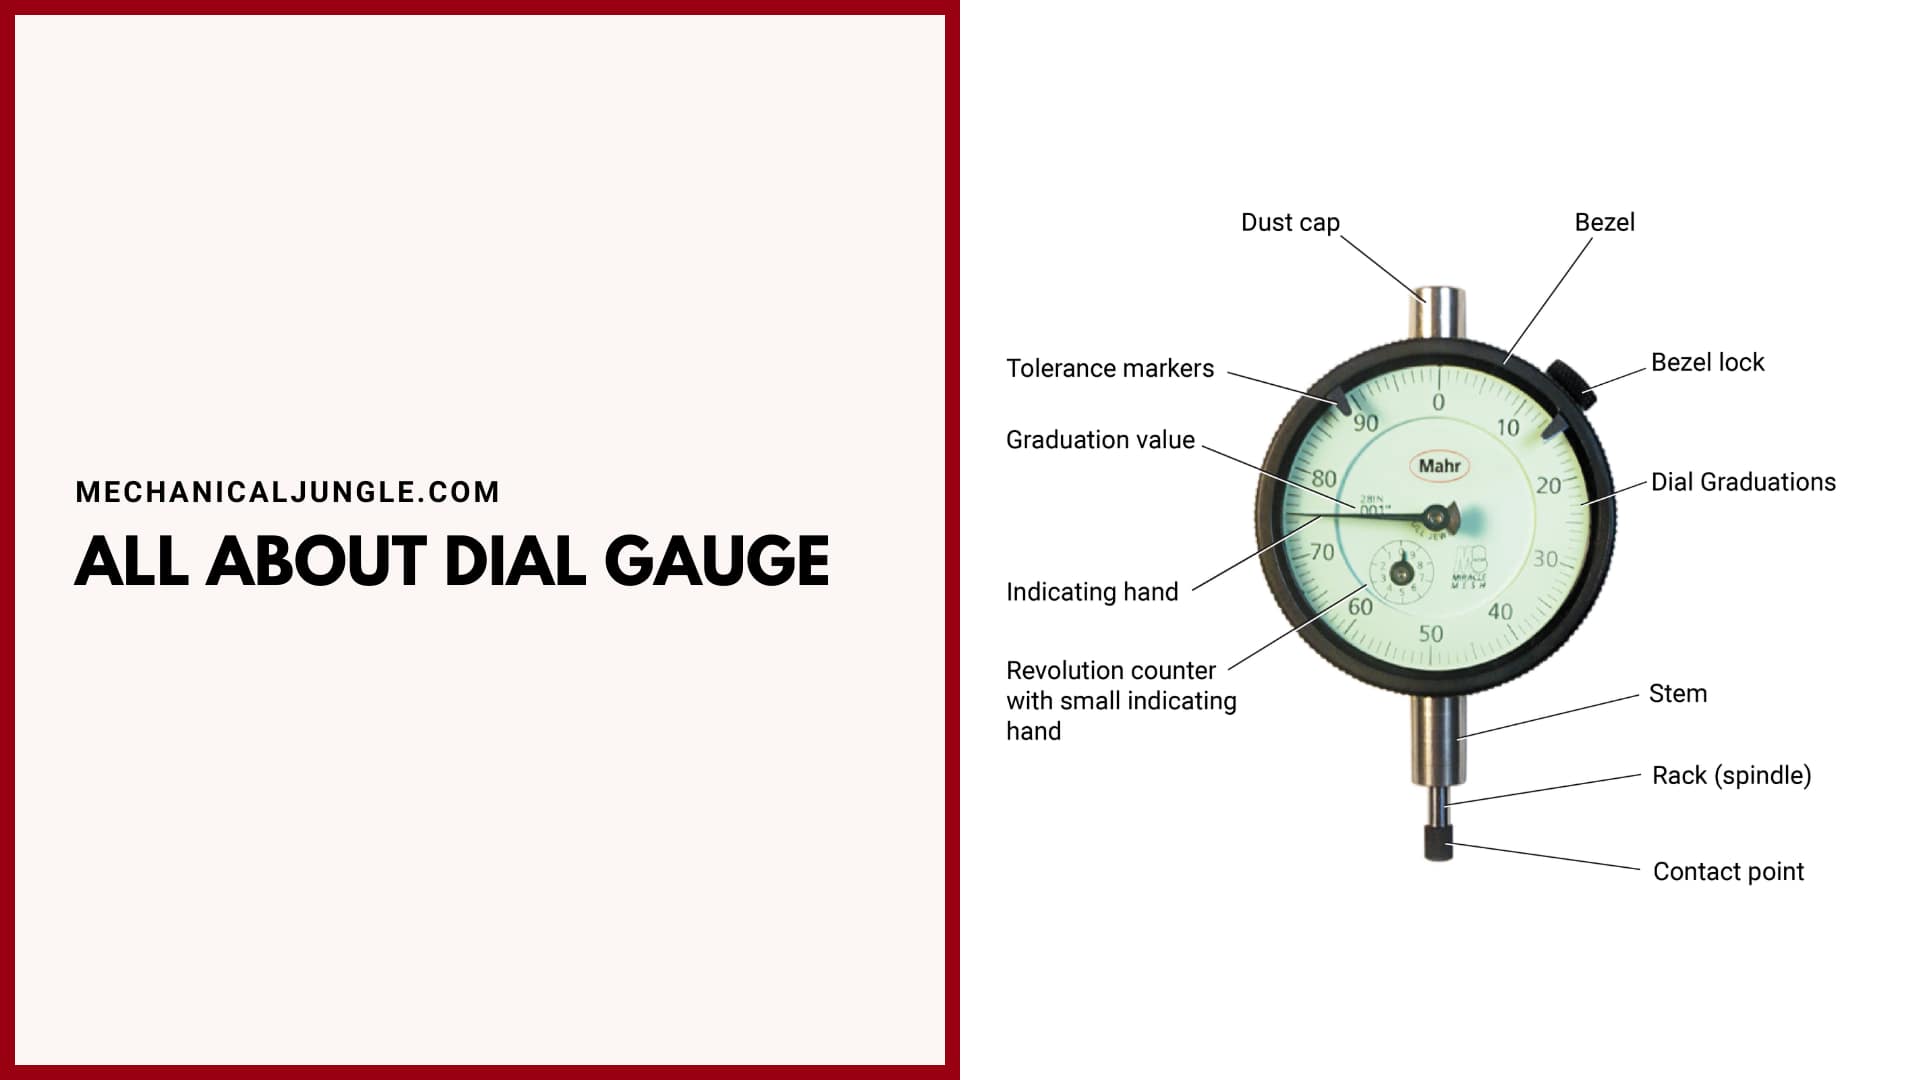 All About Dial Gauge